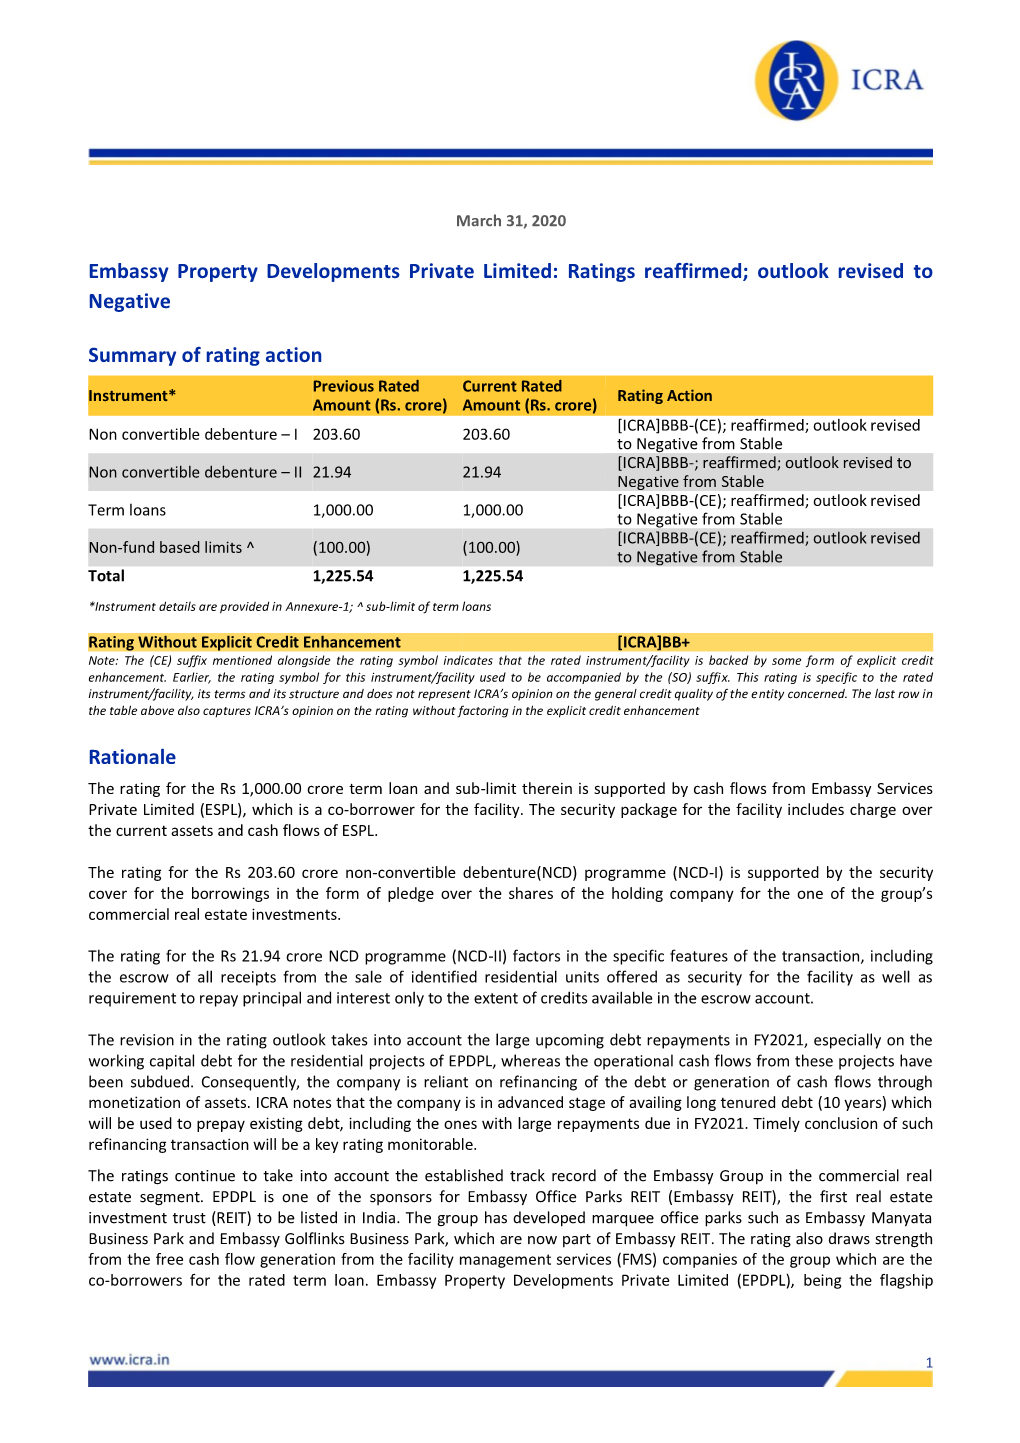 Embassy Property Developments Private Limited: Ratings Reaffirmed; Outlook Revised to Negative